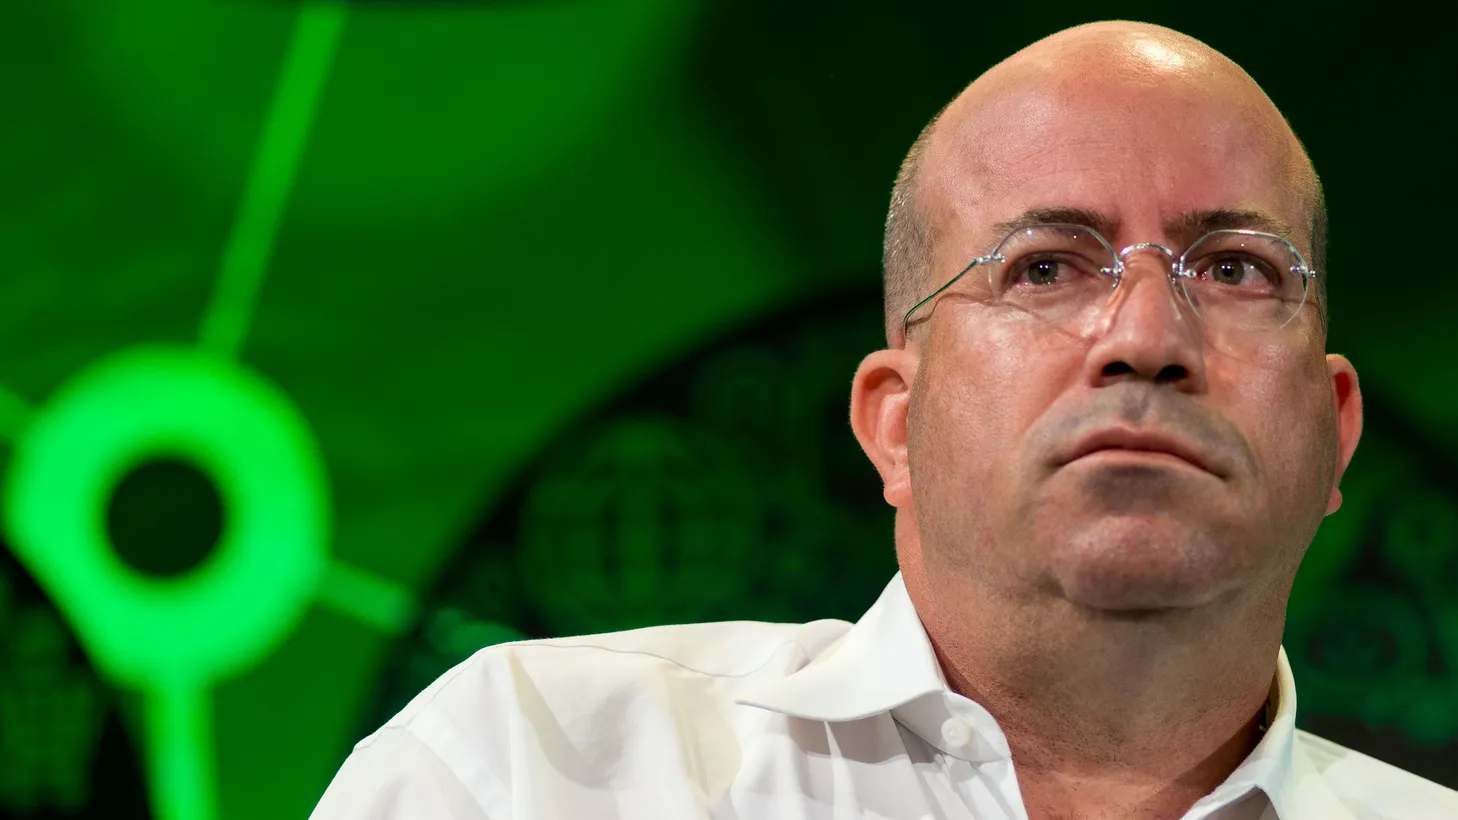 Jeff Zucker attends Fortune Brainstorm TECH 2013. This week, Zucker resigned as the head of CNN after failing to disclose a romantic relationship with a senior executive.